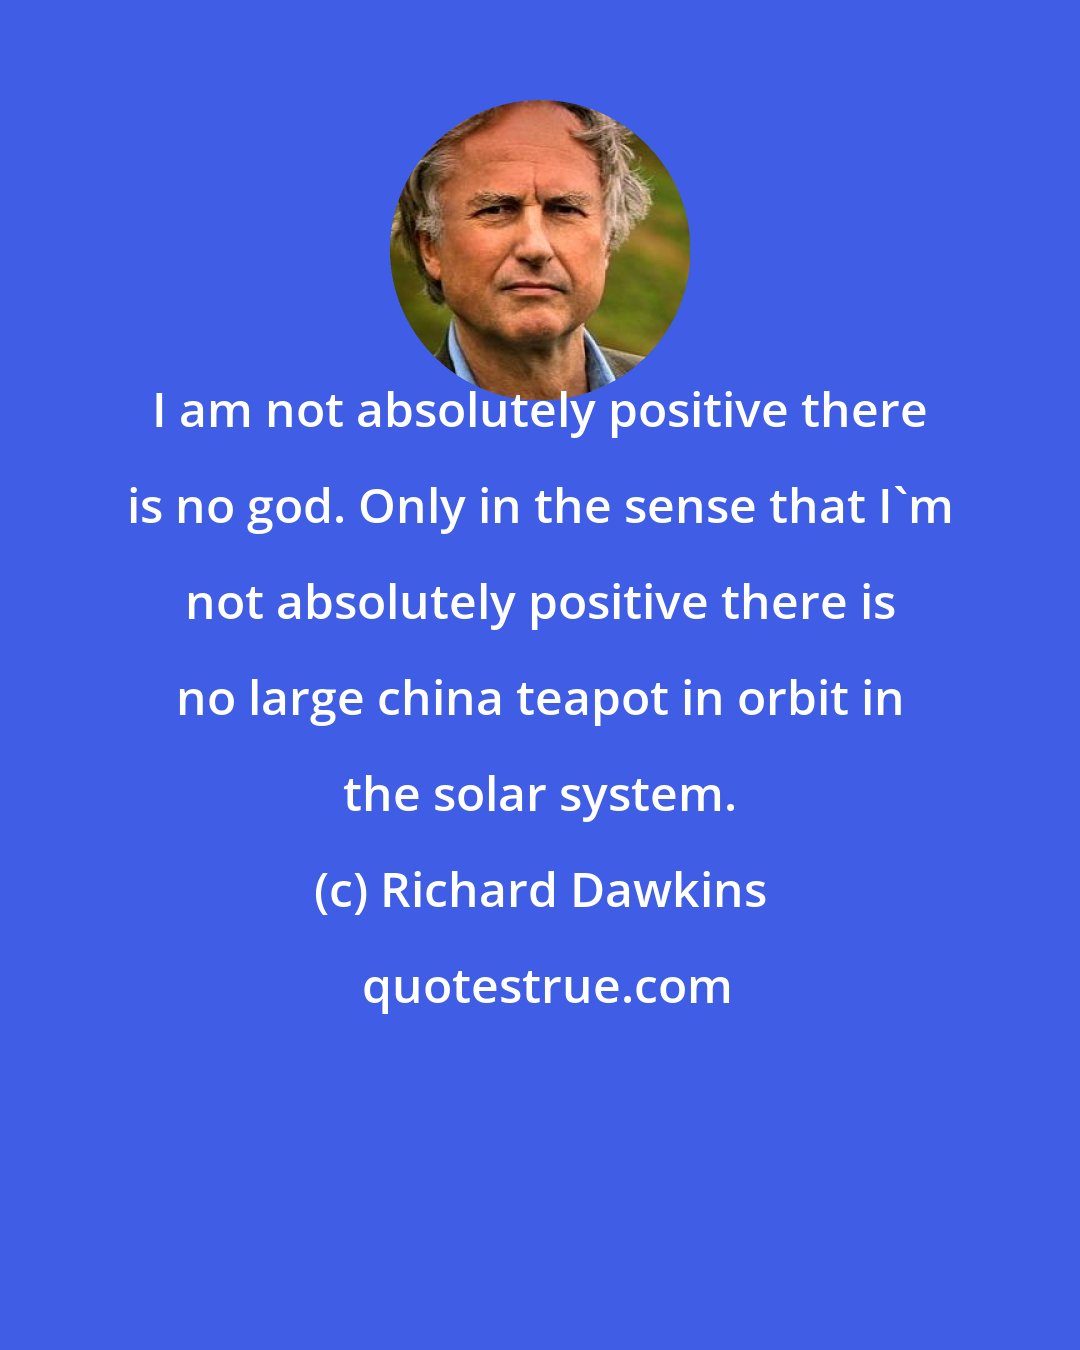 Richard Dawkins: I am not absolutely positive there is no god. Only in the sense that I'm not absolutely positive there is no large china teapot in orbit in the solar system.